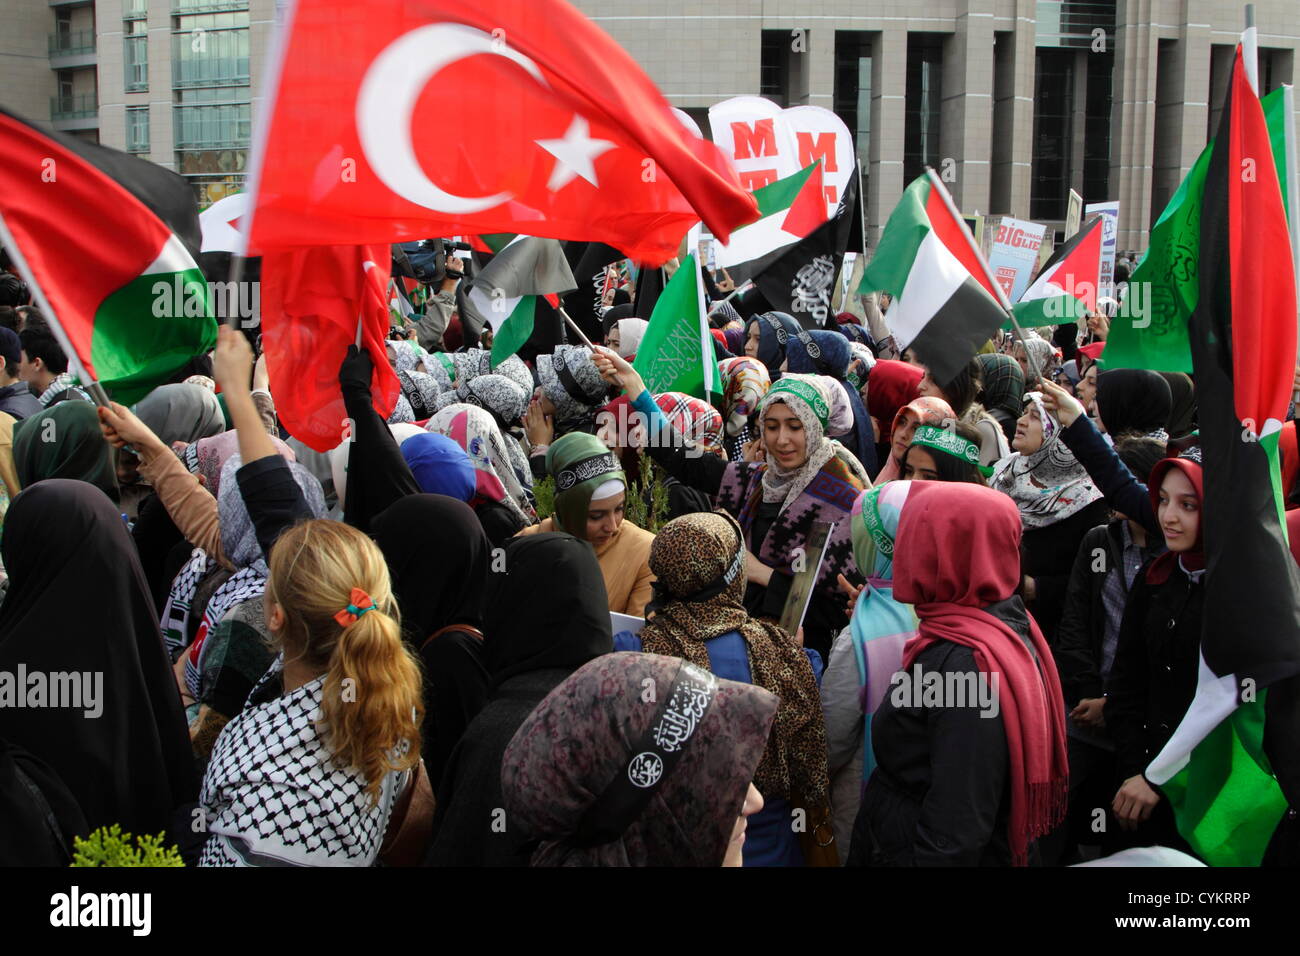 Istanbul, Turkey. 6th November, 2012. Gaza Freedom Fleet supporters rally in front of Istanbul courthouse. Hundreds of Turkish and Palestinian flags are being waved by the large crowd of demonstrators. Flag sellers sell all types and sizes and seem to make a good business out of the rally. Credit:  Johann Brandstatter / Alamy Live News Stock Photo